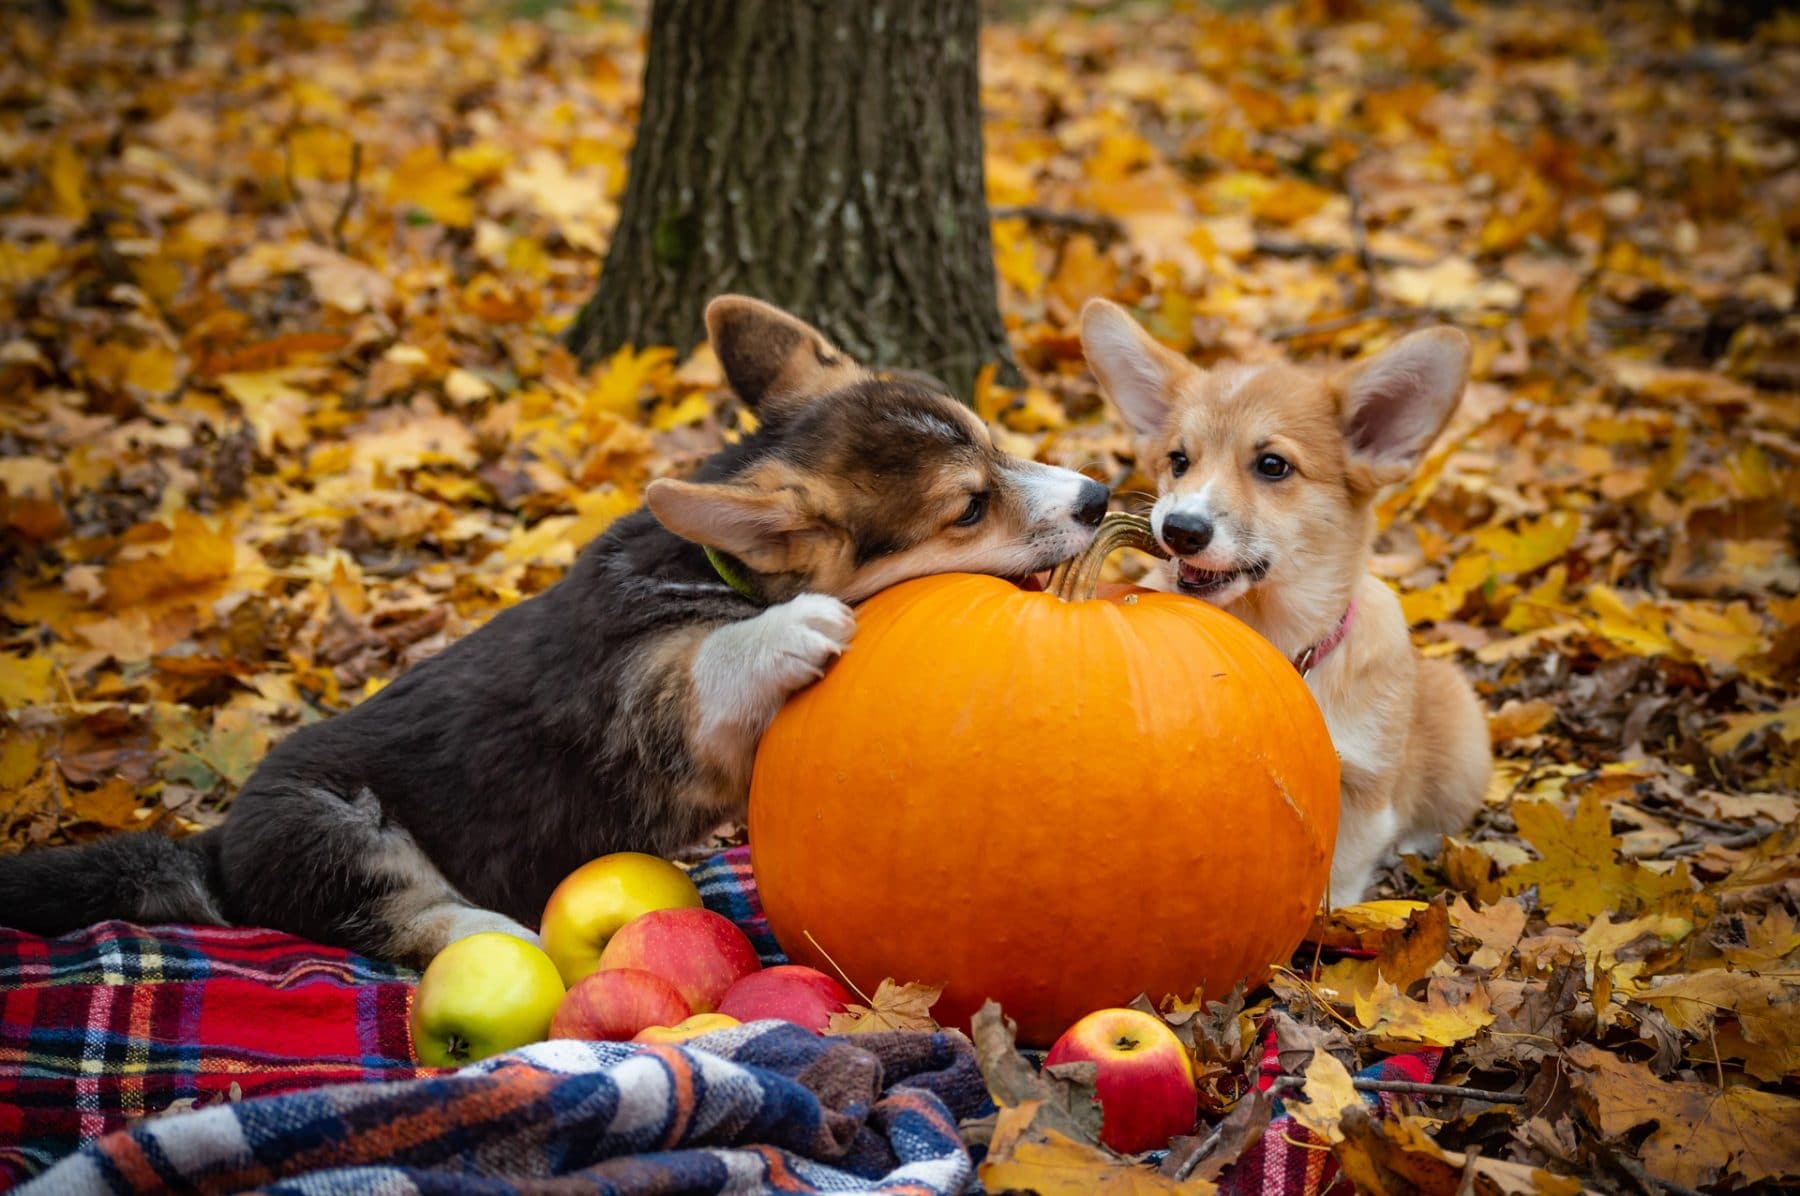 Pet Superfood How To Cook Pumpkin For Cats And Dogs